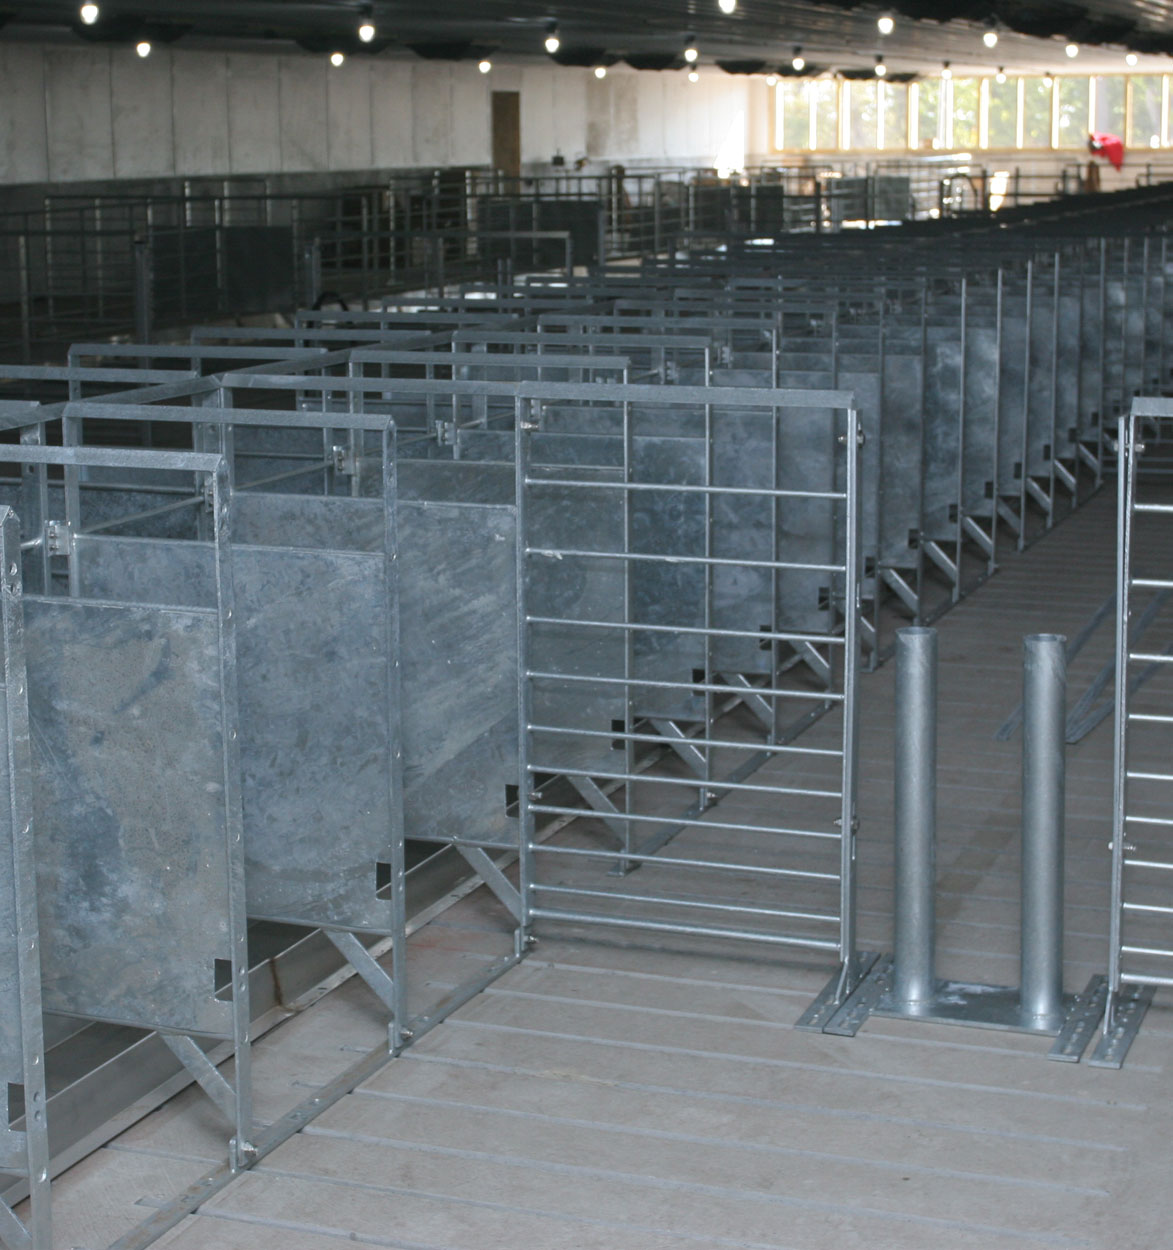 Hog Slat stanchions for sow group housing can be manufactured with several different divider options. (Shown: Galvanized solid metal divider panels with stainless steel sow feeding trough and walk-through post.)